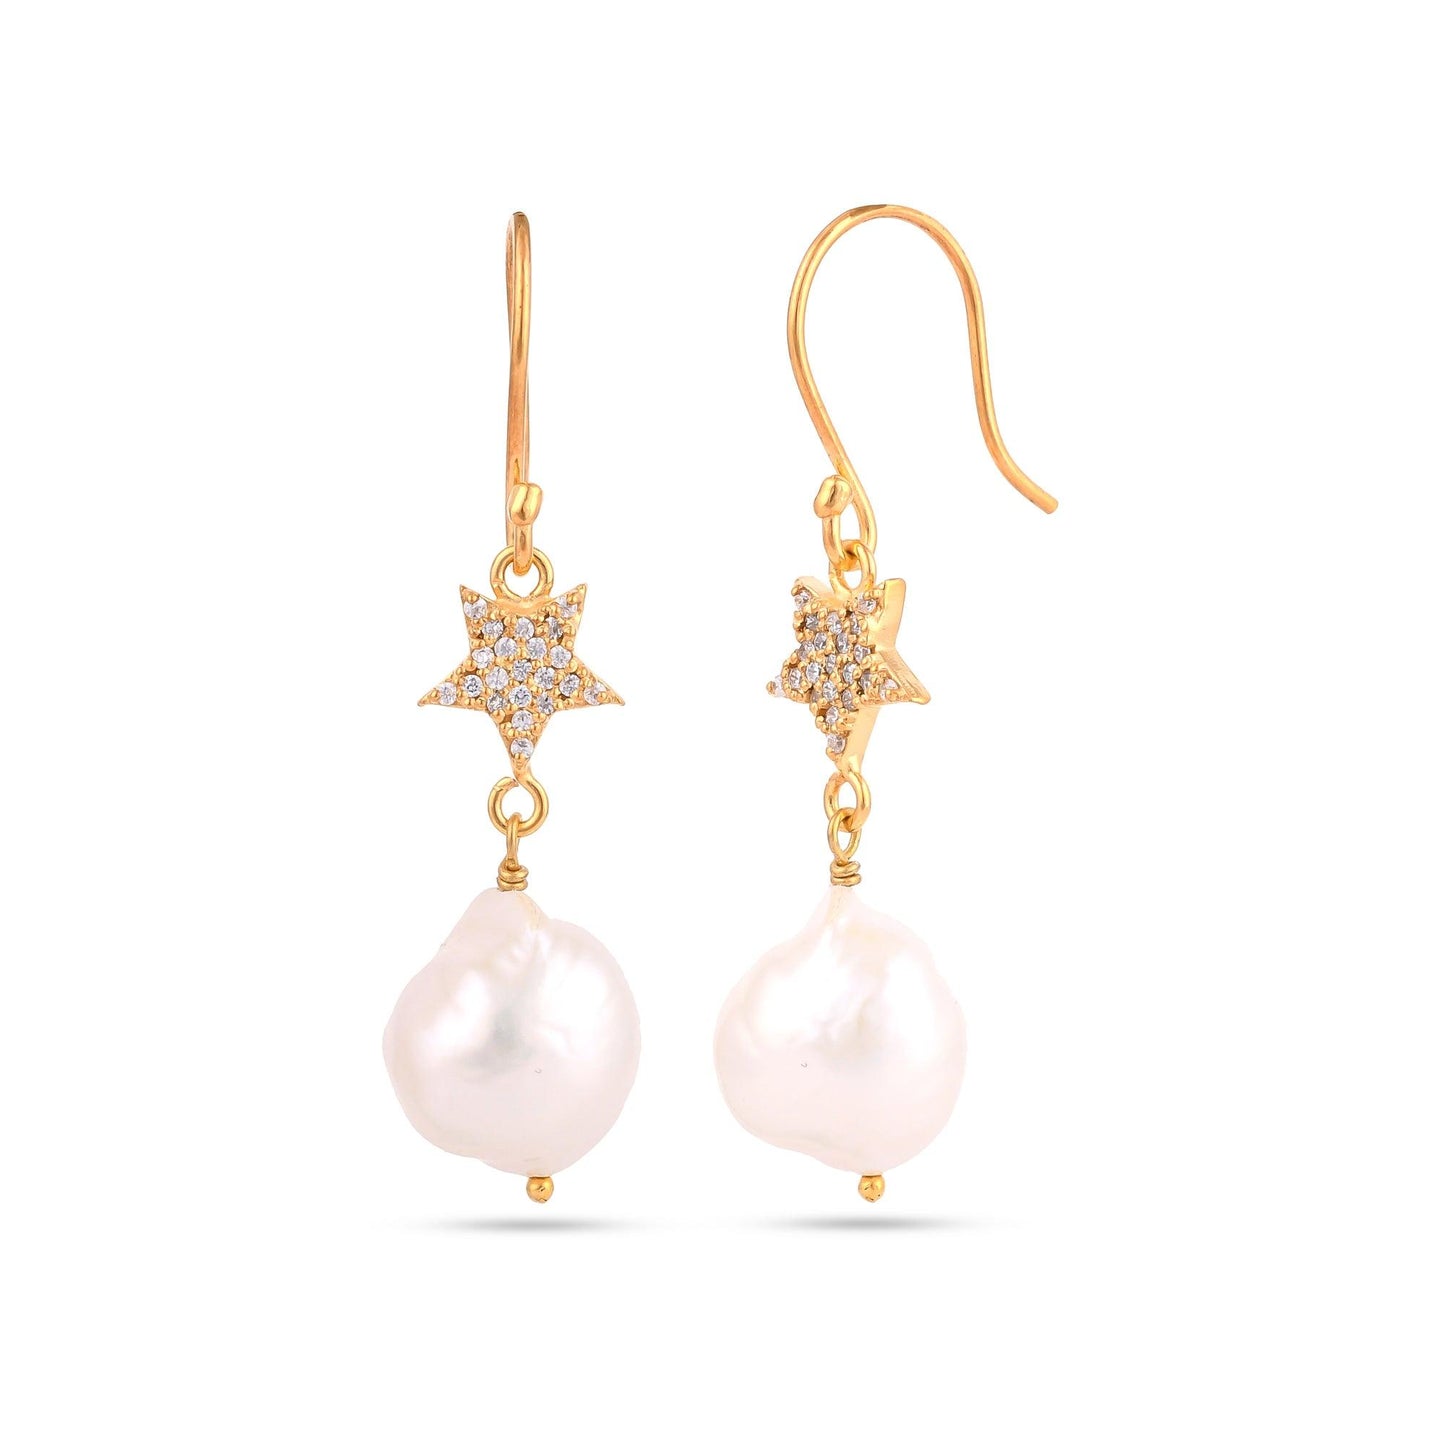 Shining Star Pearl Silver Earring - From Purl Purl